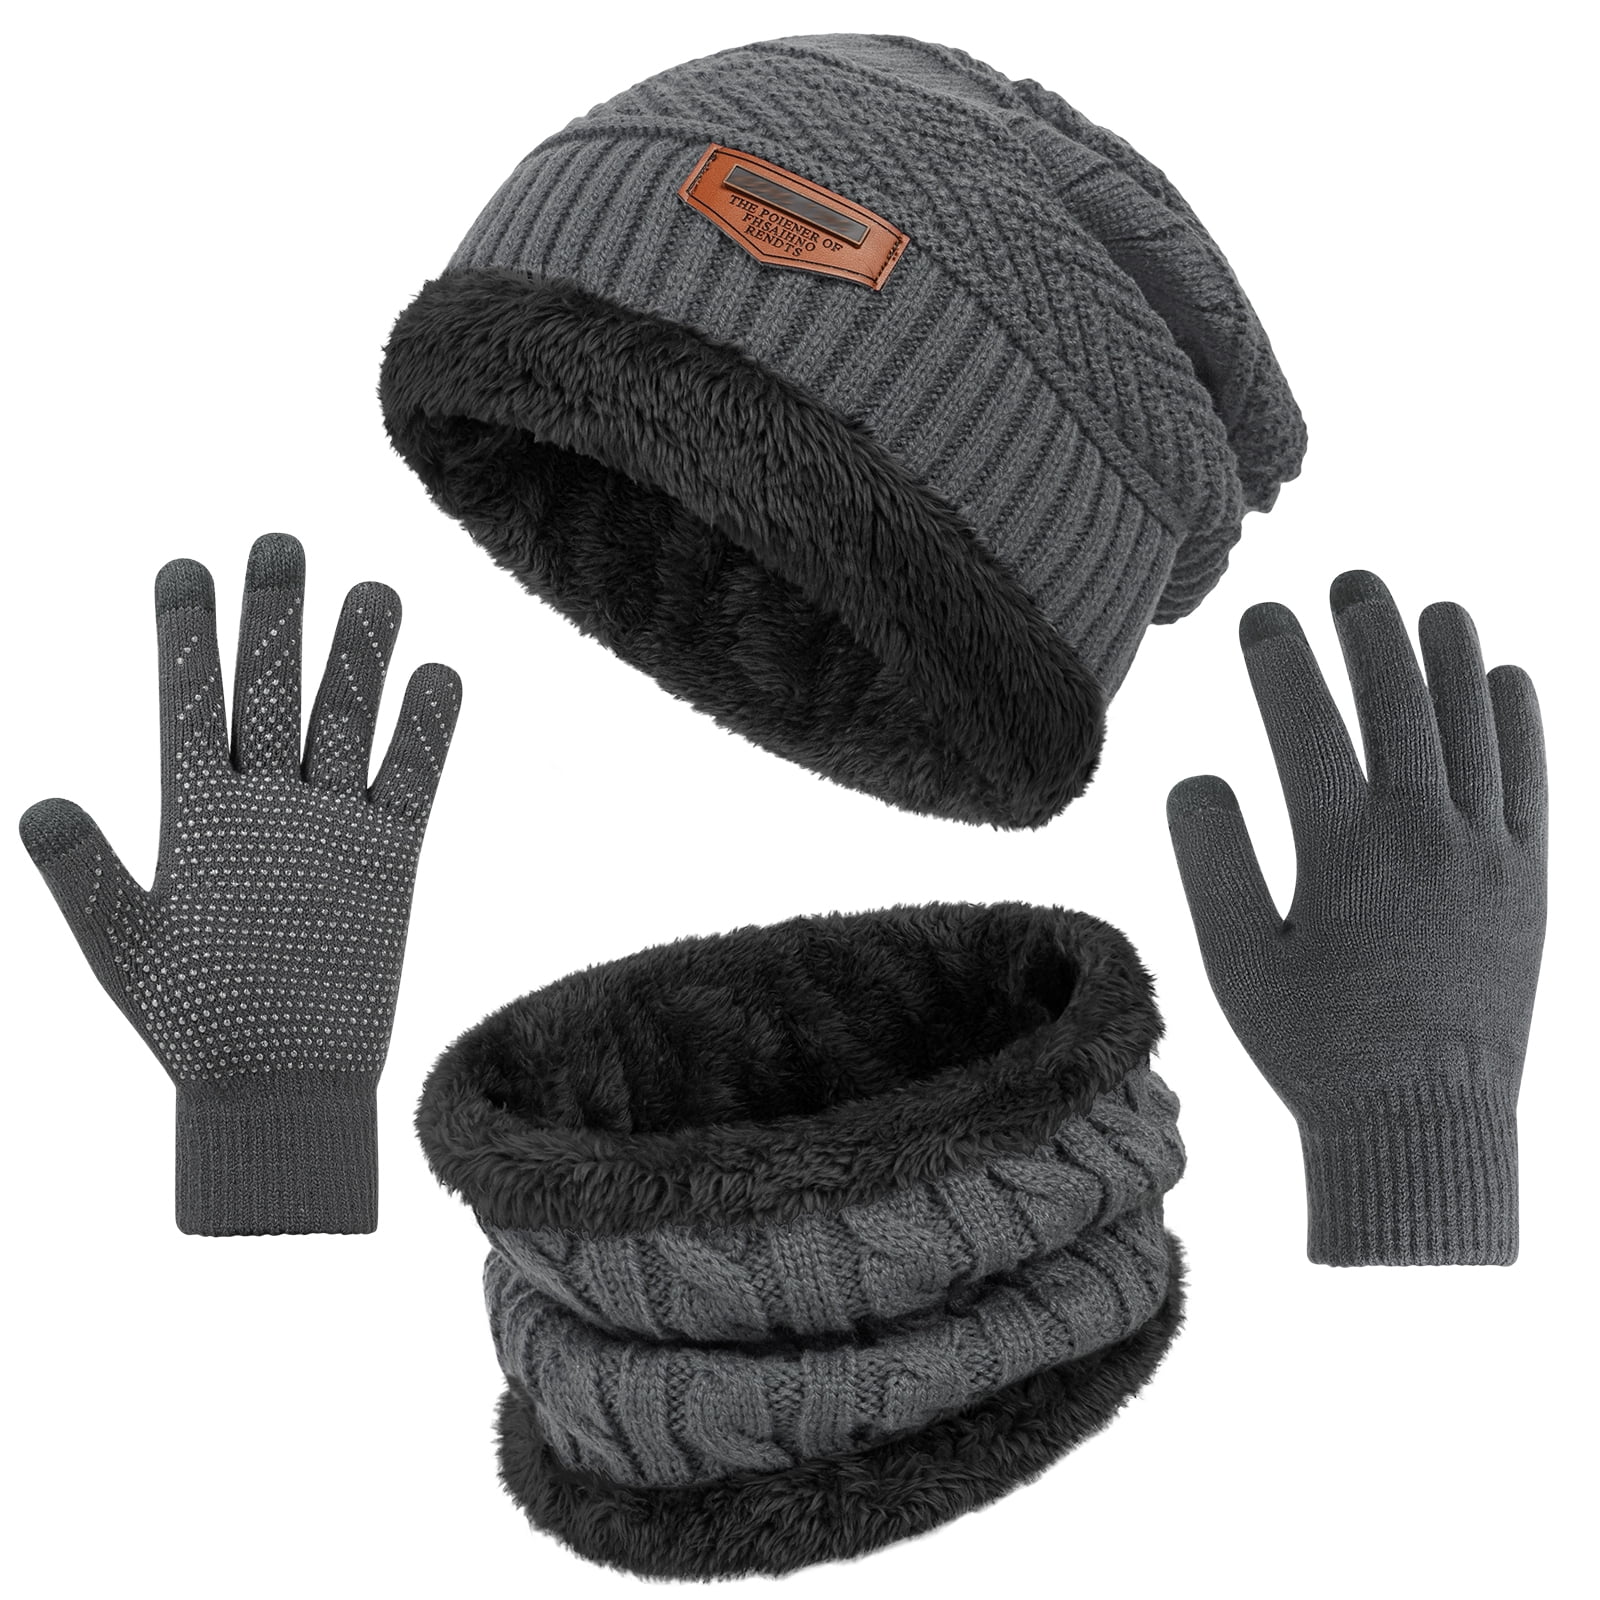 Loritta 3 Pack Mens Hats and Scarf Set Soft Casual Winter Gloves Beanie ...